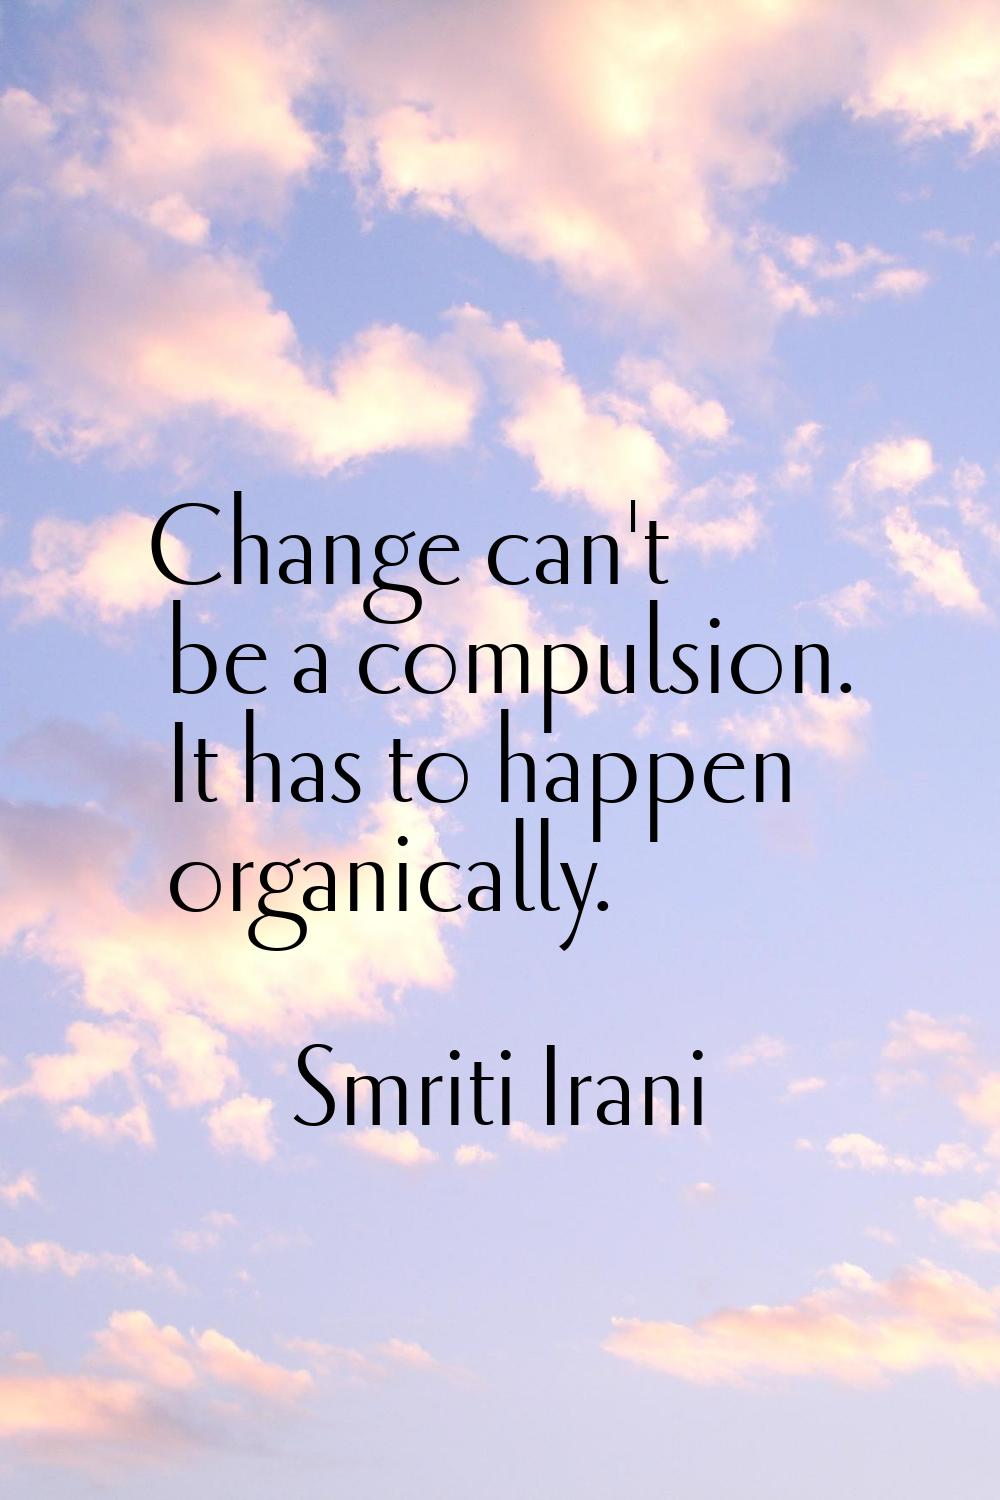 Change can't be a compulsion. It has to happen organically.